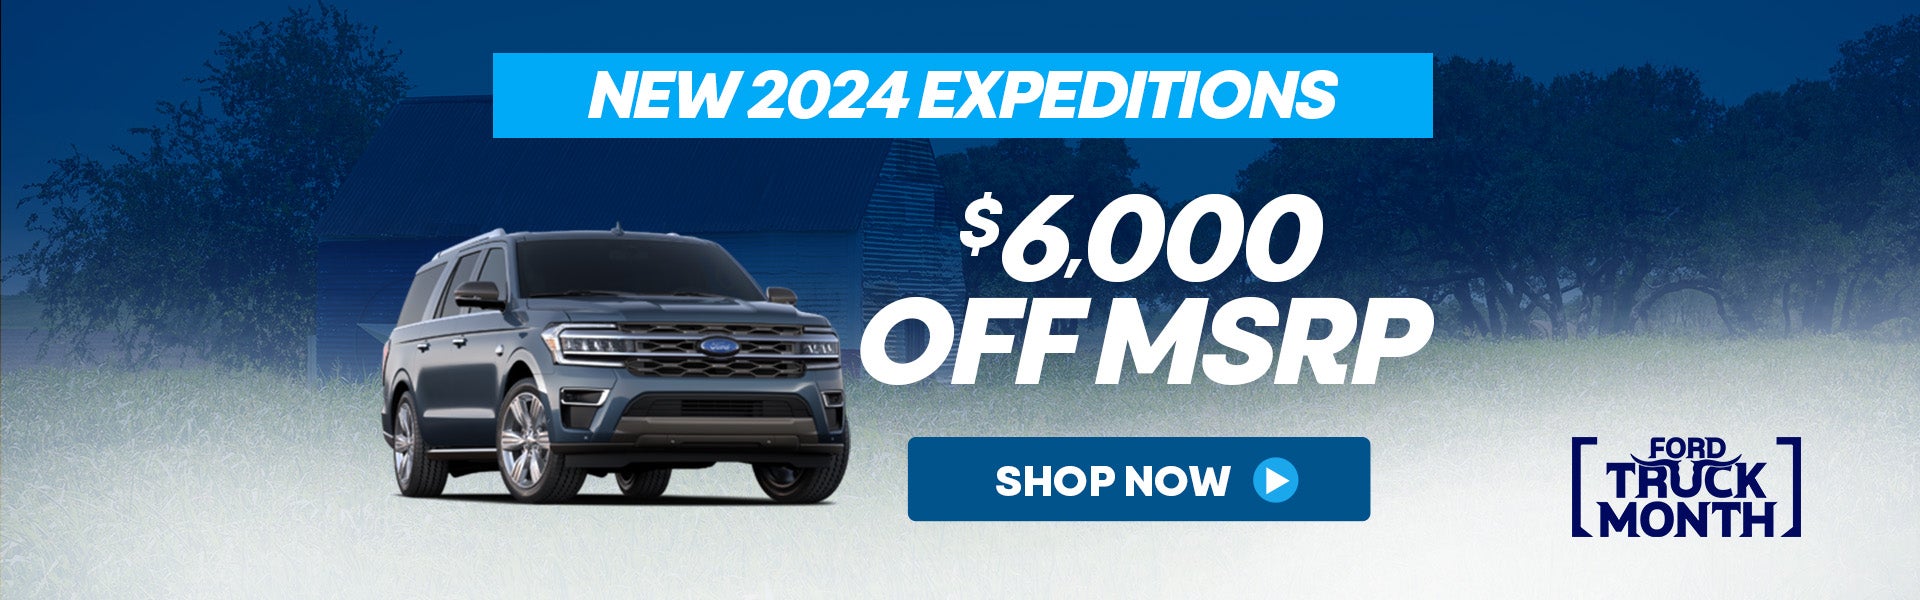 New Ford Expedition Deals Near Me in Rosenberg, TX